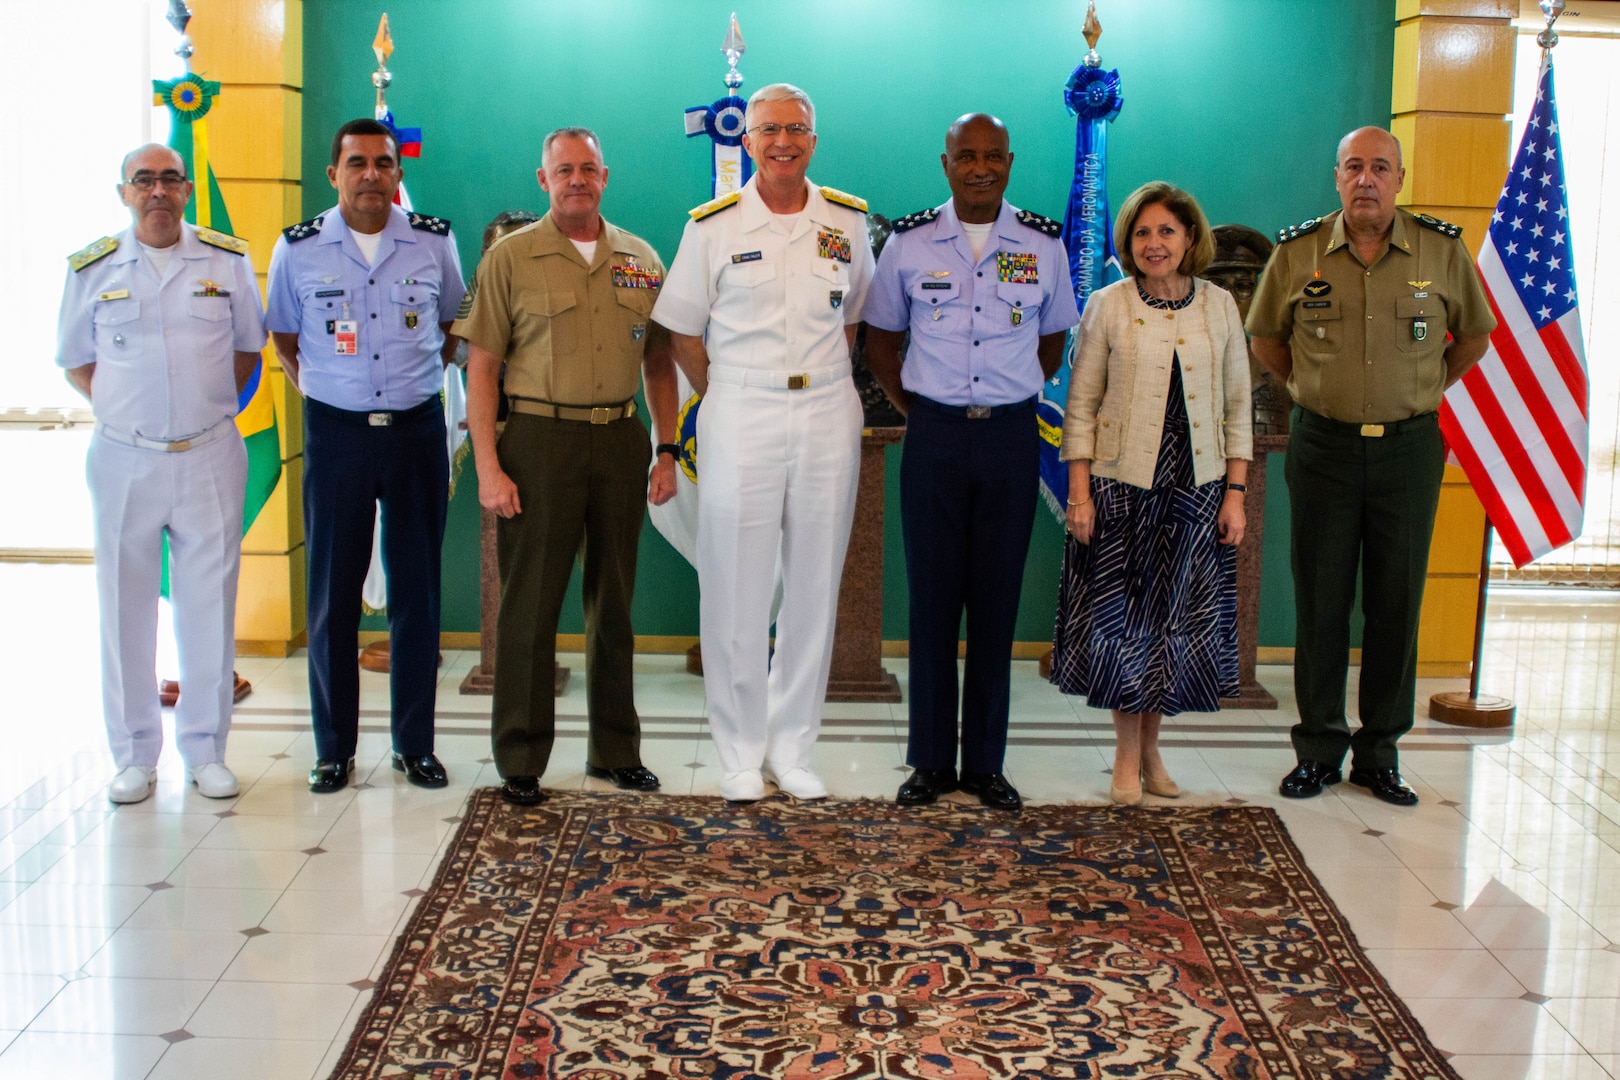 The commander of U.S. Southern Command, Navy Adm. Craig Faller, poses for a photo with Brazil's Chief of Defense, Lieutenant-Brigadier Raul Botelho, in Brasília Feb. 11, 2019.